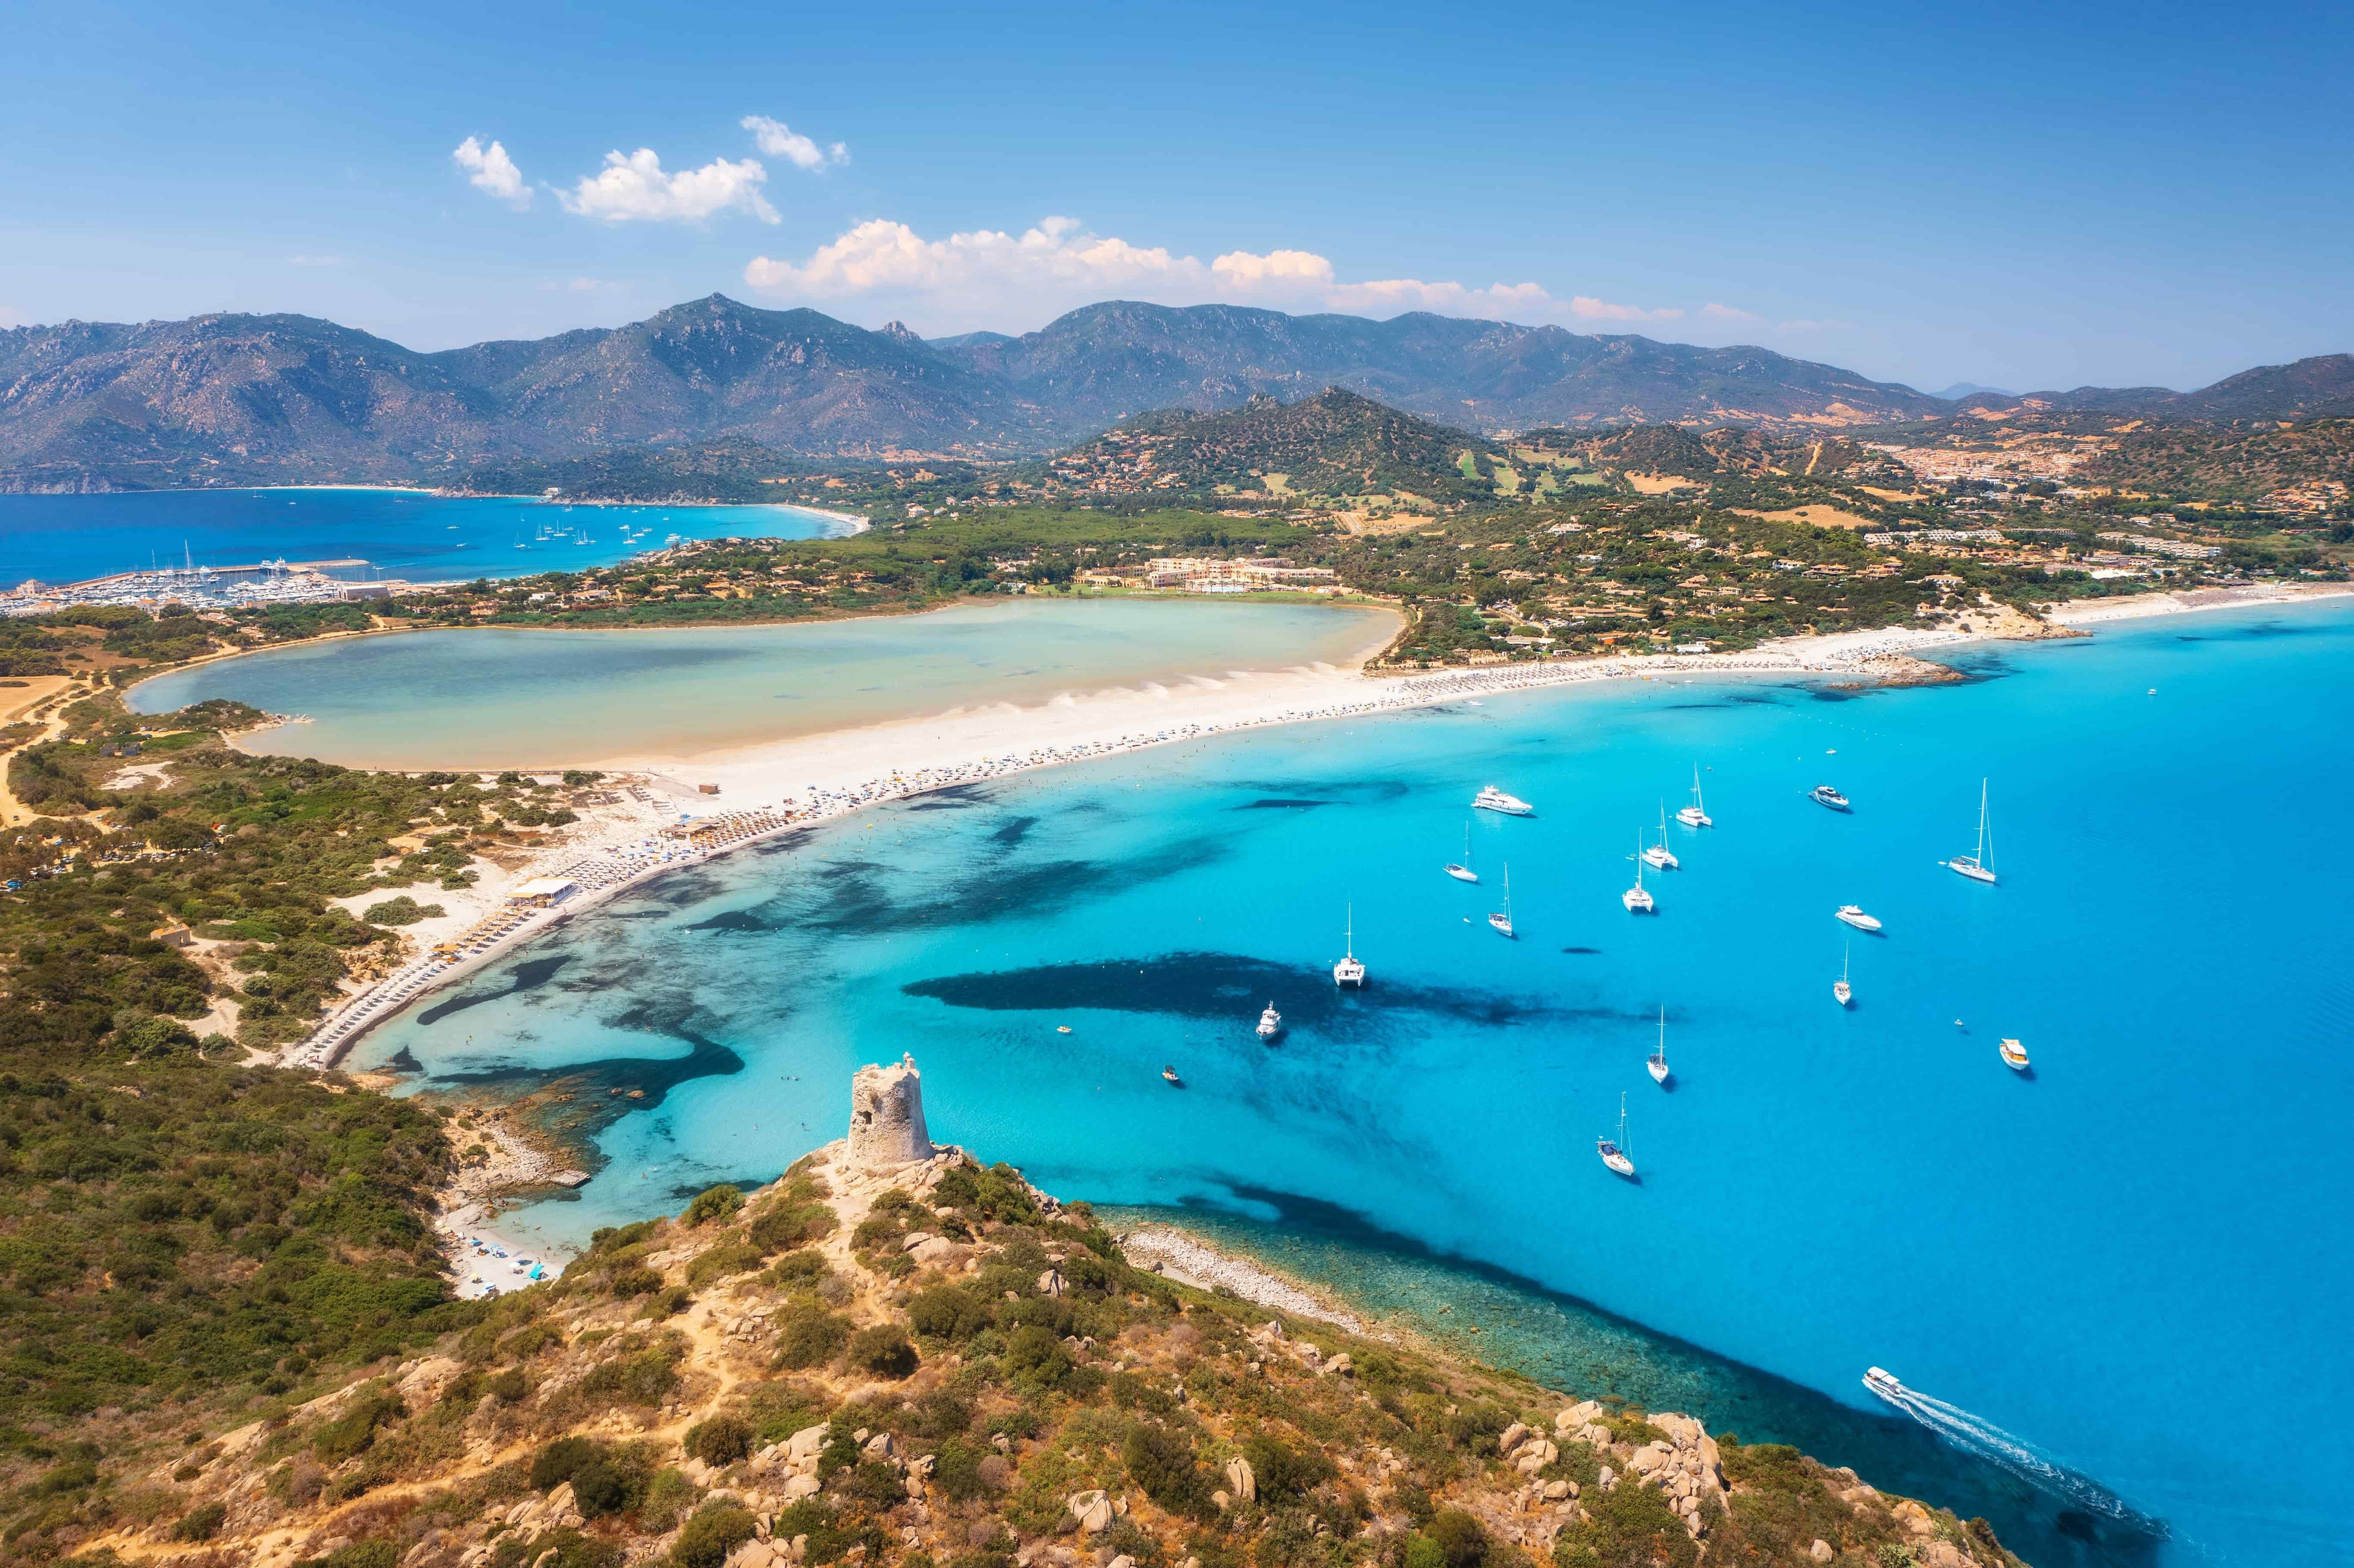 Among its many charms, what makes Sardinia so appealing is its stunning coastline, white sandy beaches, ancient archaeological sites, and tranquil villages. Sardinia is not only the second-largest island in Italy, but is home to the famous Costa Smeralda coastline, the UNESCO World Heritage Site known as <a href="https://whc.unesco.org/en/list/833/" rel="noreferrer noopener">Su Nuraxi di Barumini</a>, and a two-million-year-old cave in Capo Caccia. Plus, the island has also been identified as a <a href="https://www.nbcnews.com/better/lifestyle/what-blue-zone-island-sardinia-can-teach-us-about-living-ncna1011051" rel="noreferrer noopener">Blue Zones region</a>, an area known for health and longevity thanks to the diet, work habits, and traditions of its residents.